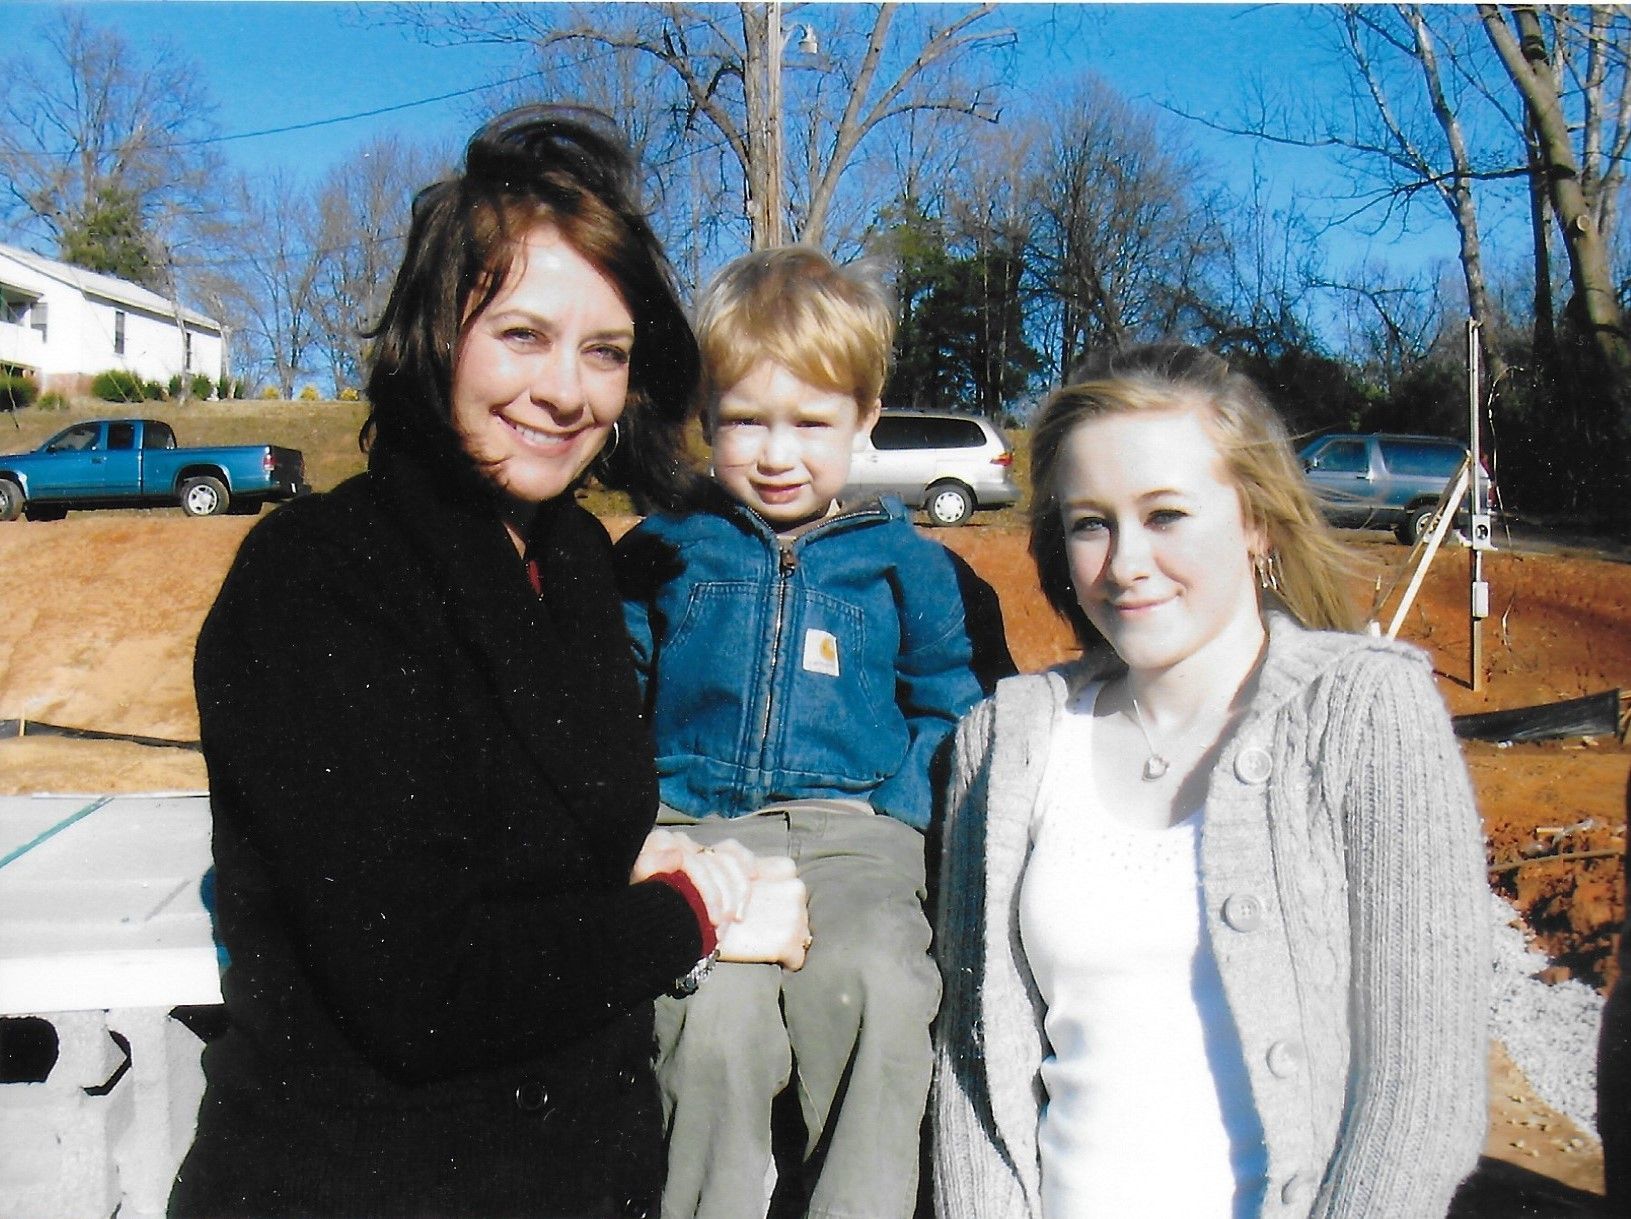 Melissa Phillips poses with her children.